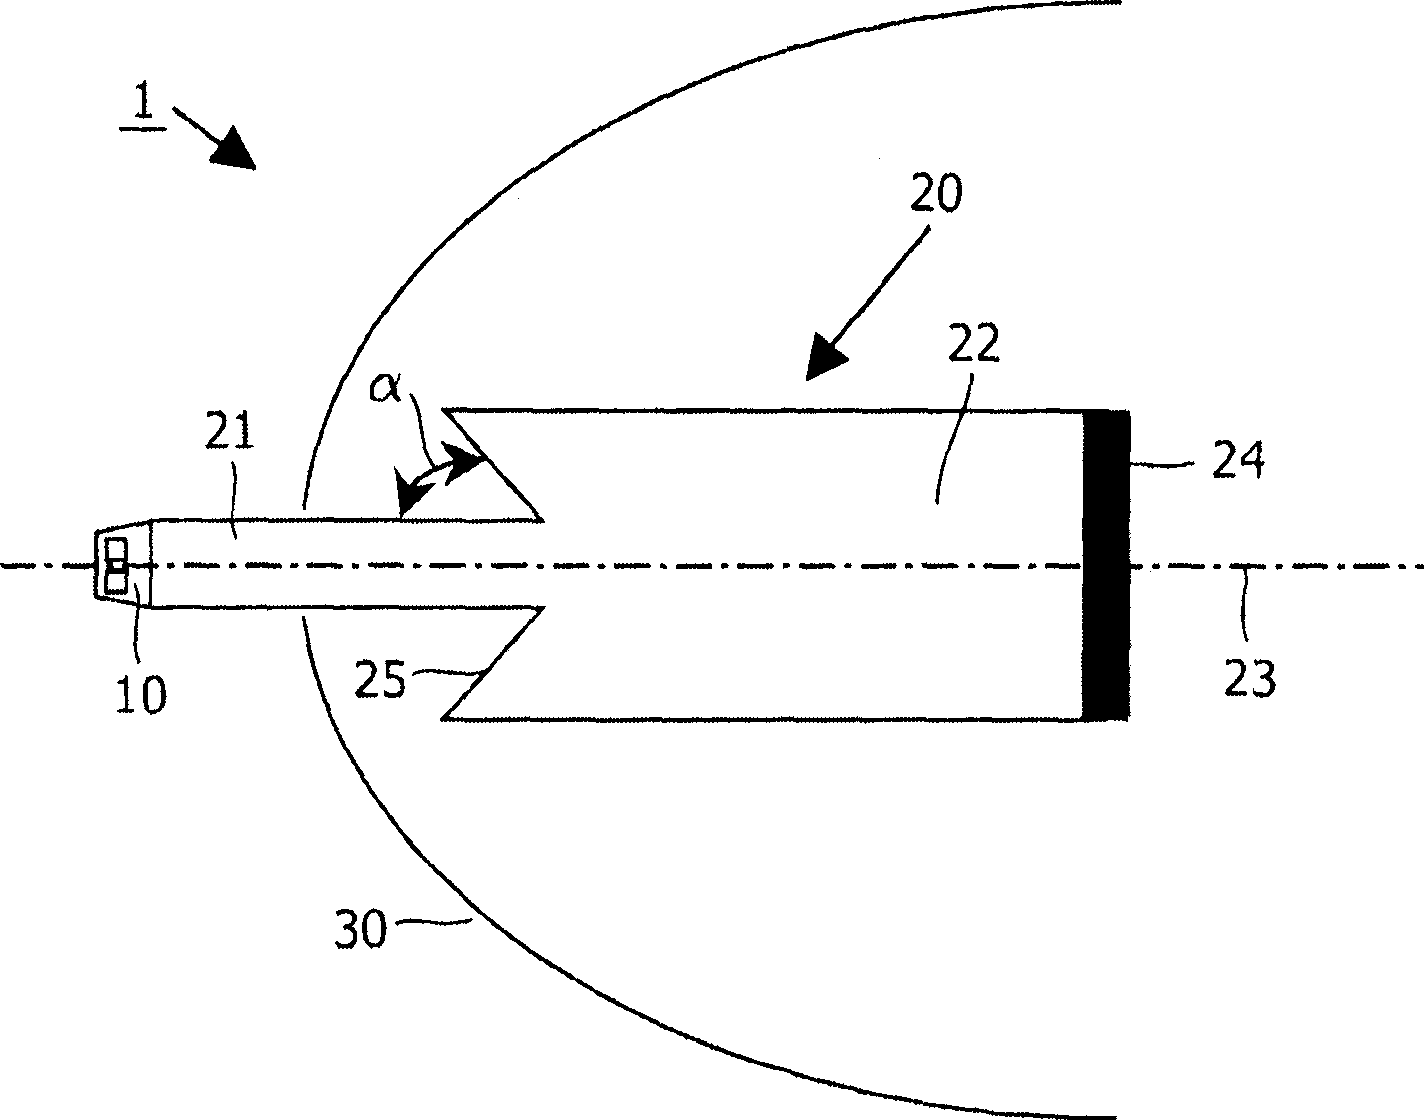 An illumination device comprising a light source and a light-guide